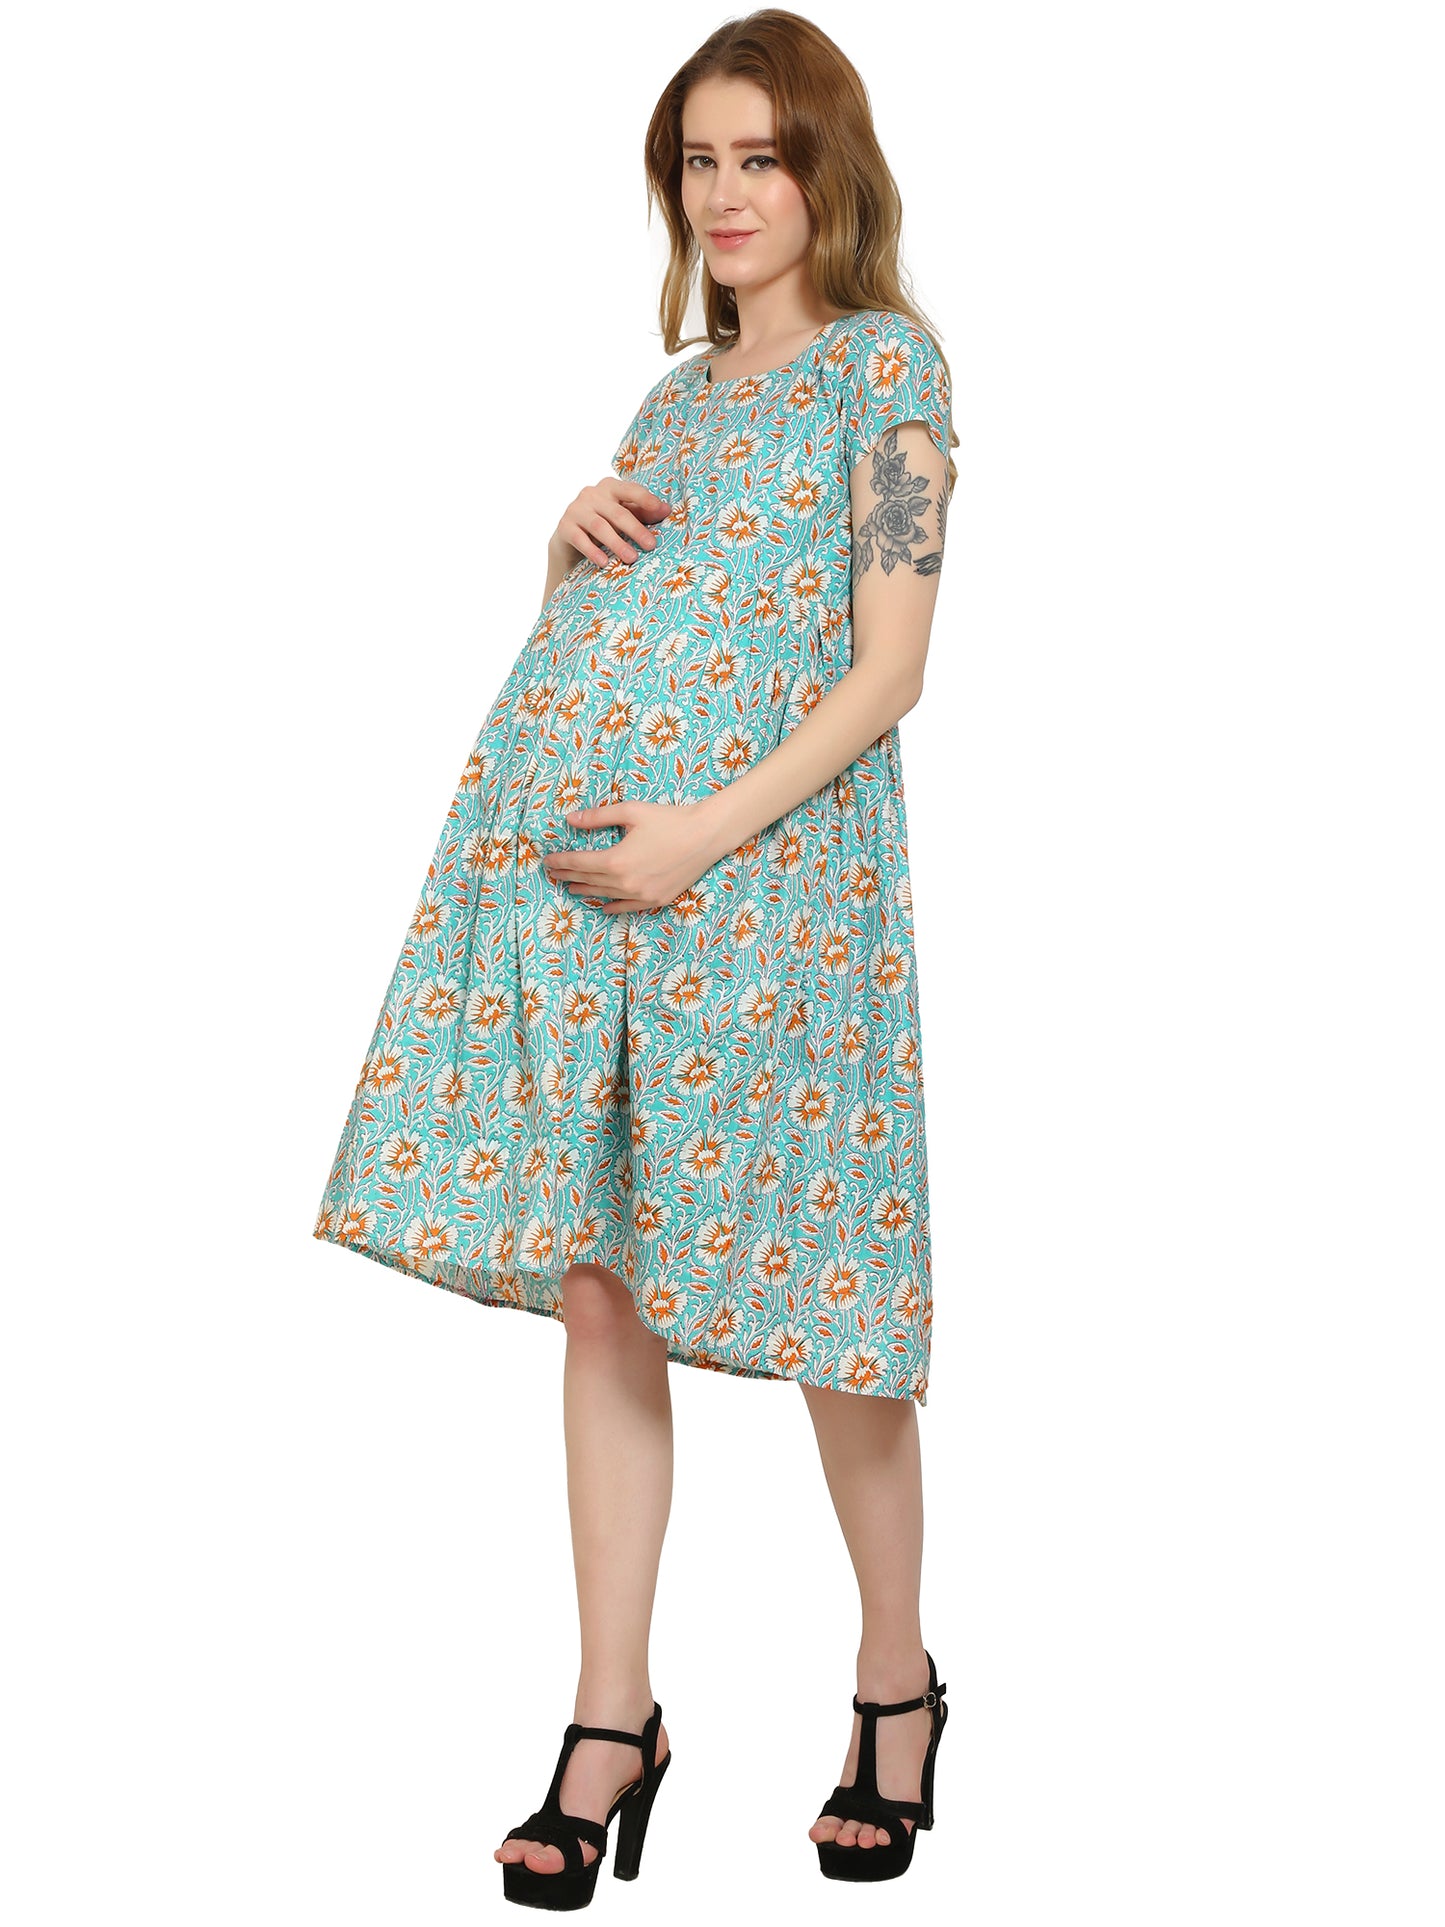 Maternity Dress | Pure Cotton | Teal Color Fit and Flare Dress | Feeding Dress | Pre and Post Pregnancy